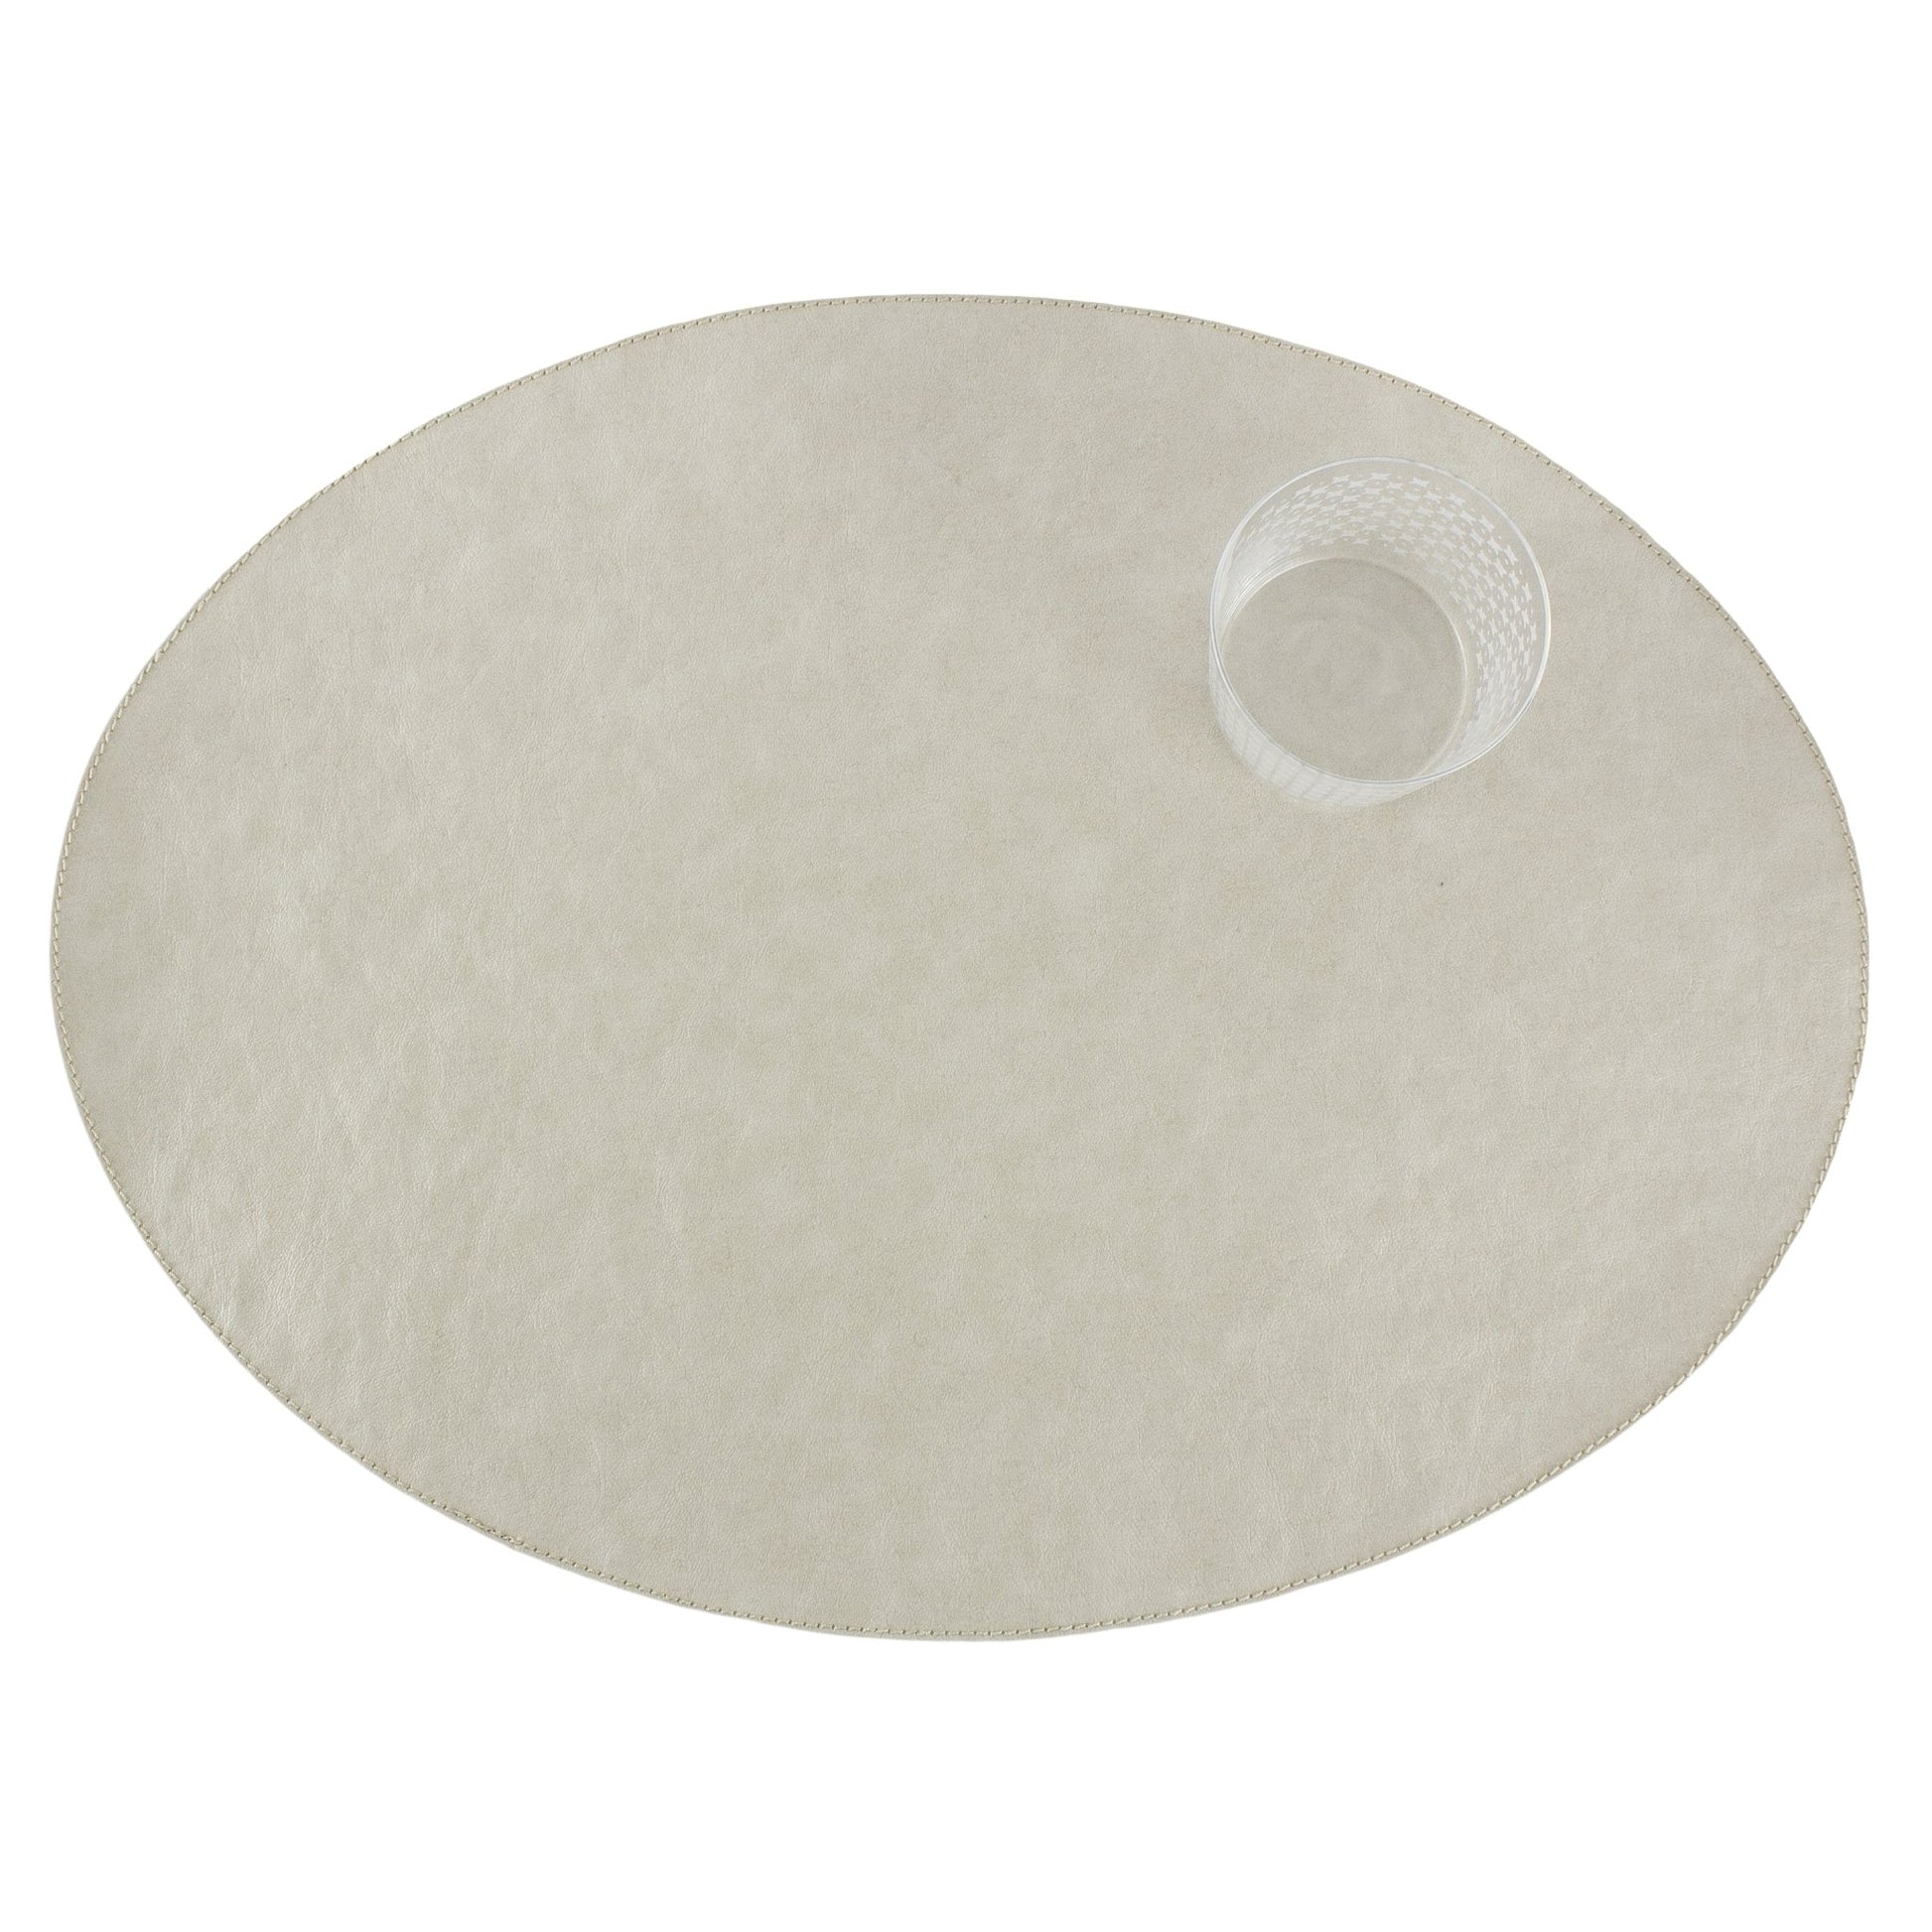 An oval washable paper placemats is shown with a small drinking glass in the upper right hand corner. The placemat shown is cream in colour.